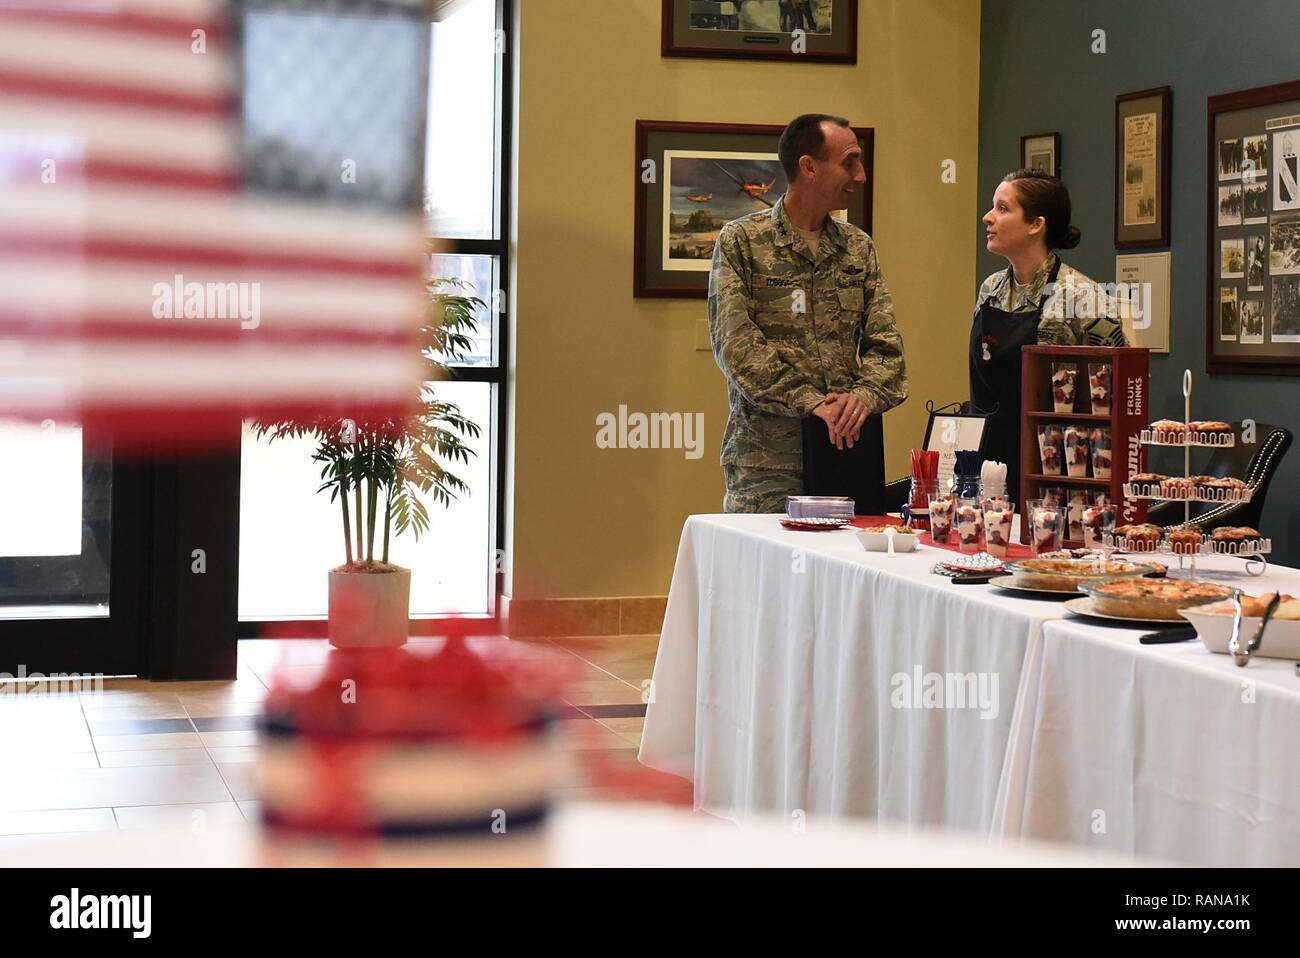 U.S. Air Force Maj. Gen. Scott Zobrist (left), 9th Air Force commander, talks with Master Sgt. Katie Neeley, 4th Aerospace Medicine Squadron superintendent, at Seymour Johnson Air Force Base, N.C., Feb. 15, 2017. Neeley and other members of the Make It Better culinary club showcased their cooking skills by preparing breakfast for Zobrist and approximately 20 other wing leaders and their spouses during his visit. Stock Photo